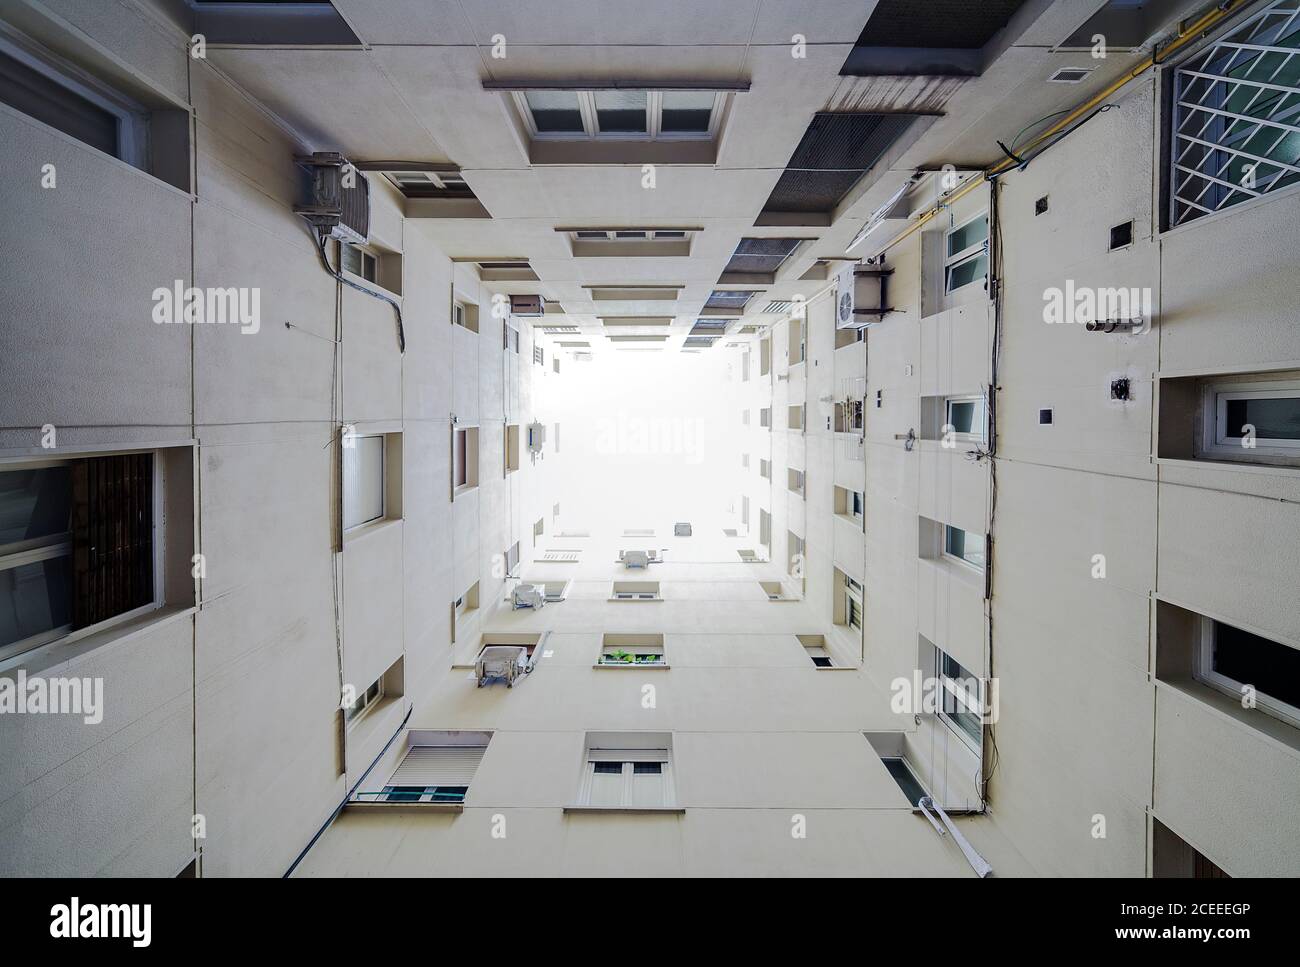 View from below of the courtyard of a building Stock Photo